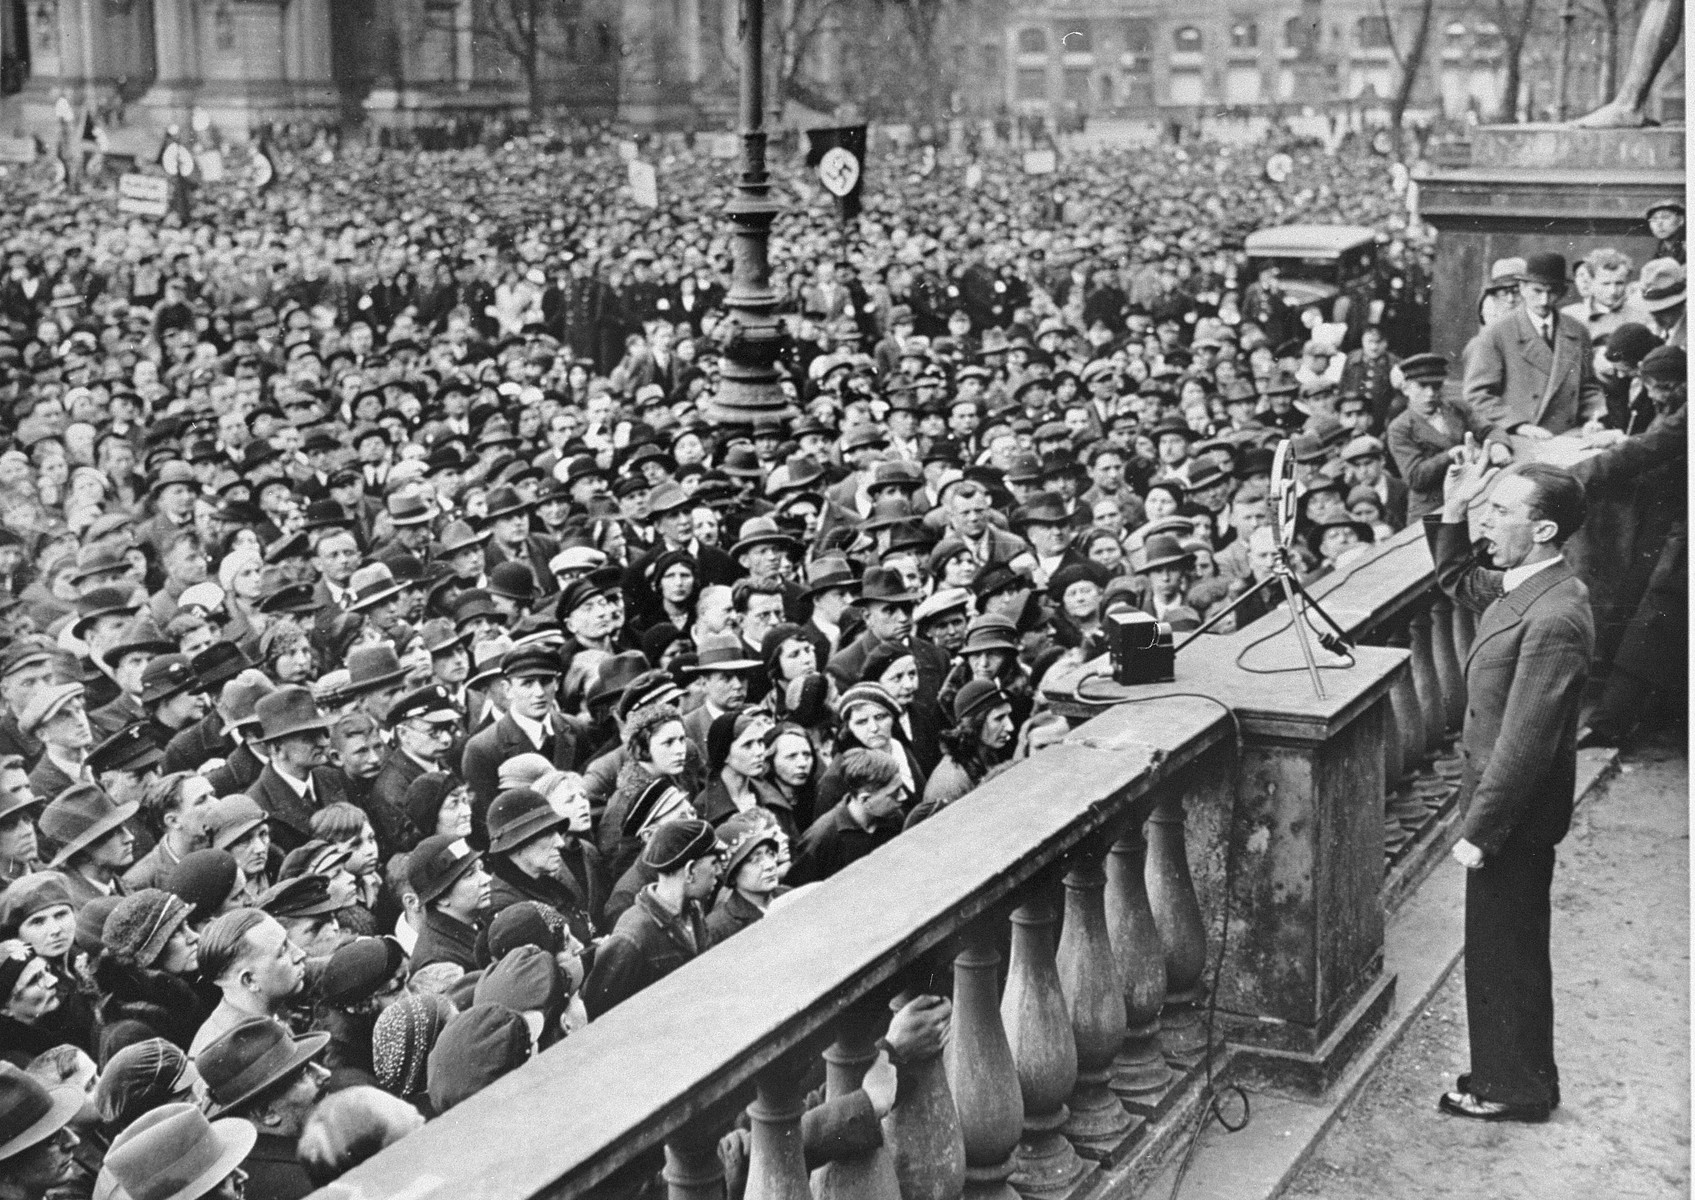 Reichsminister Joseph Goebbels delivers a speech to a crowd in the Berlin Lustgarten urging Germans to boycott Jewish-owned businesses.  He defends the boycott as a legitimate response to the anti-German "atrocity propaganda" being spread abroad by "international Jewry."